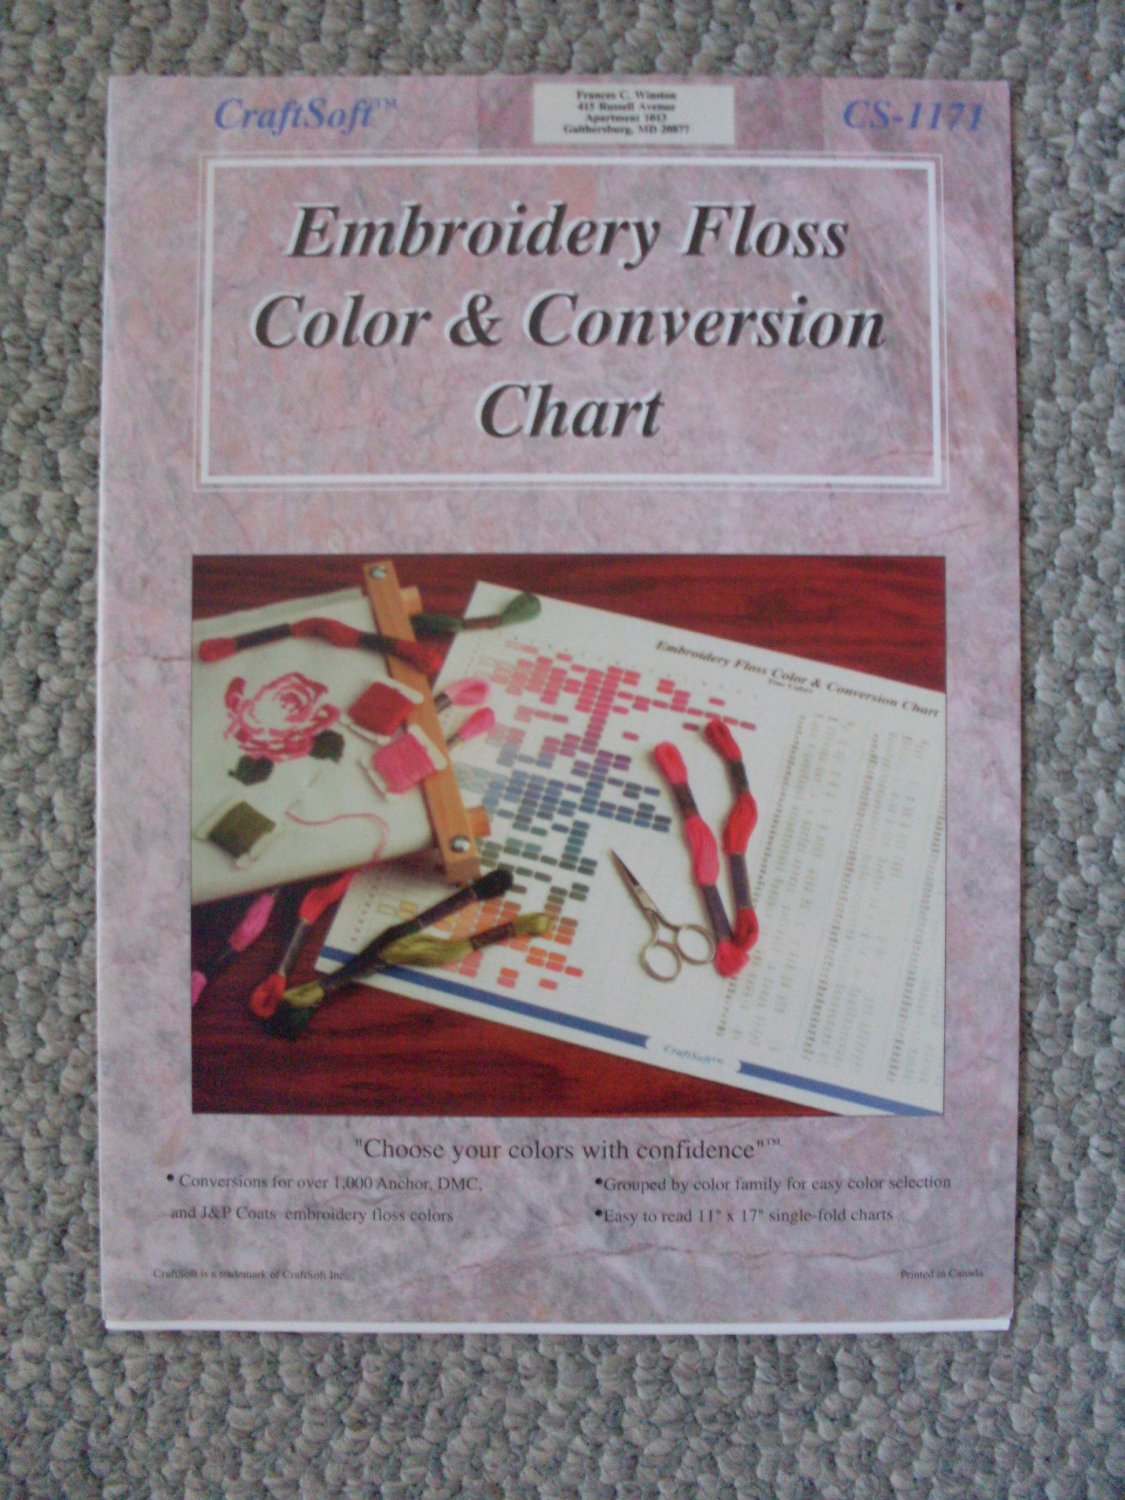 embroidery-floss-color-conversion-chart-sold